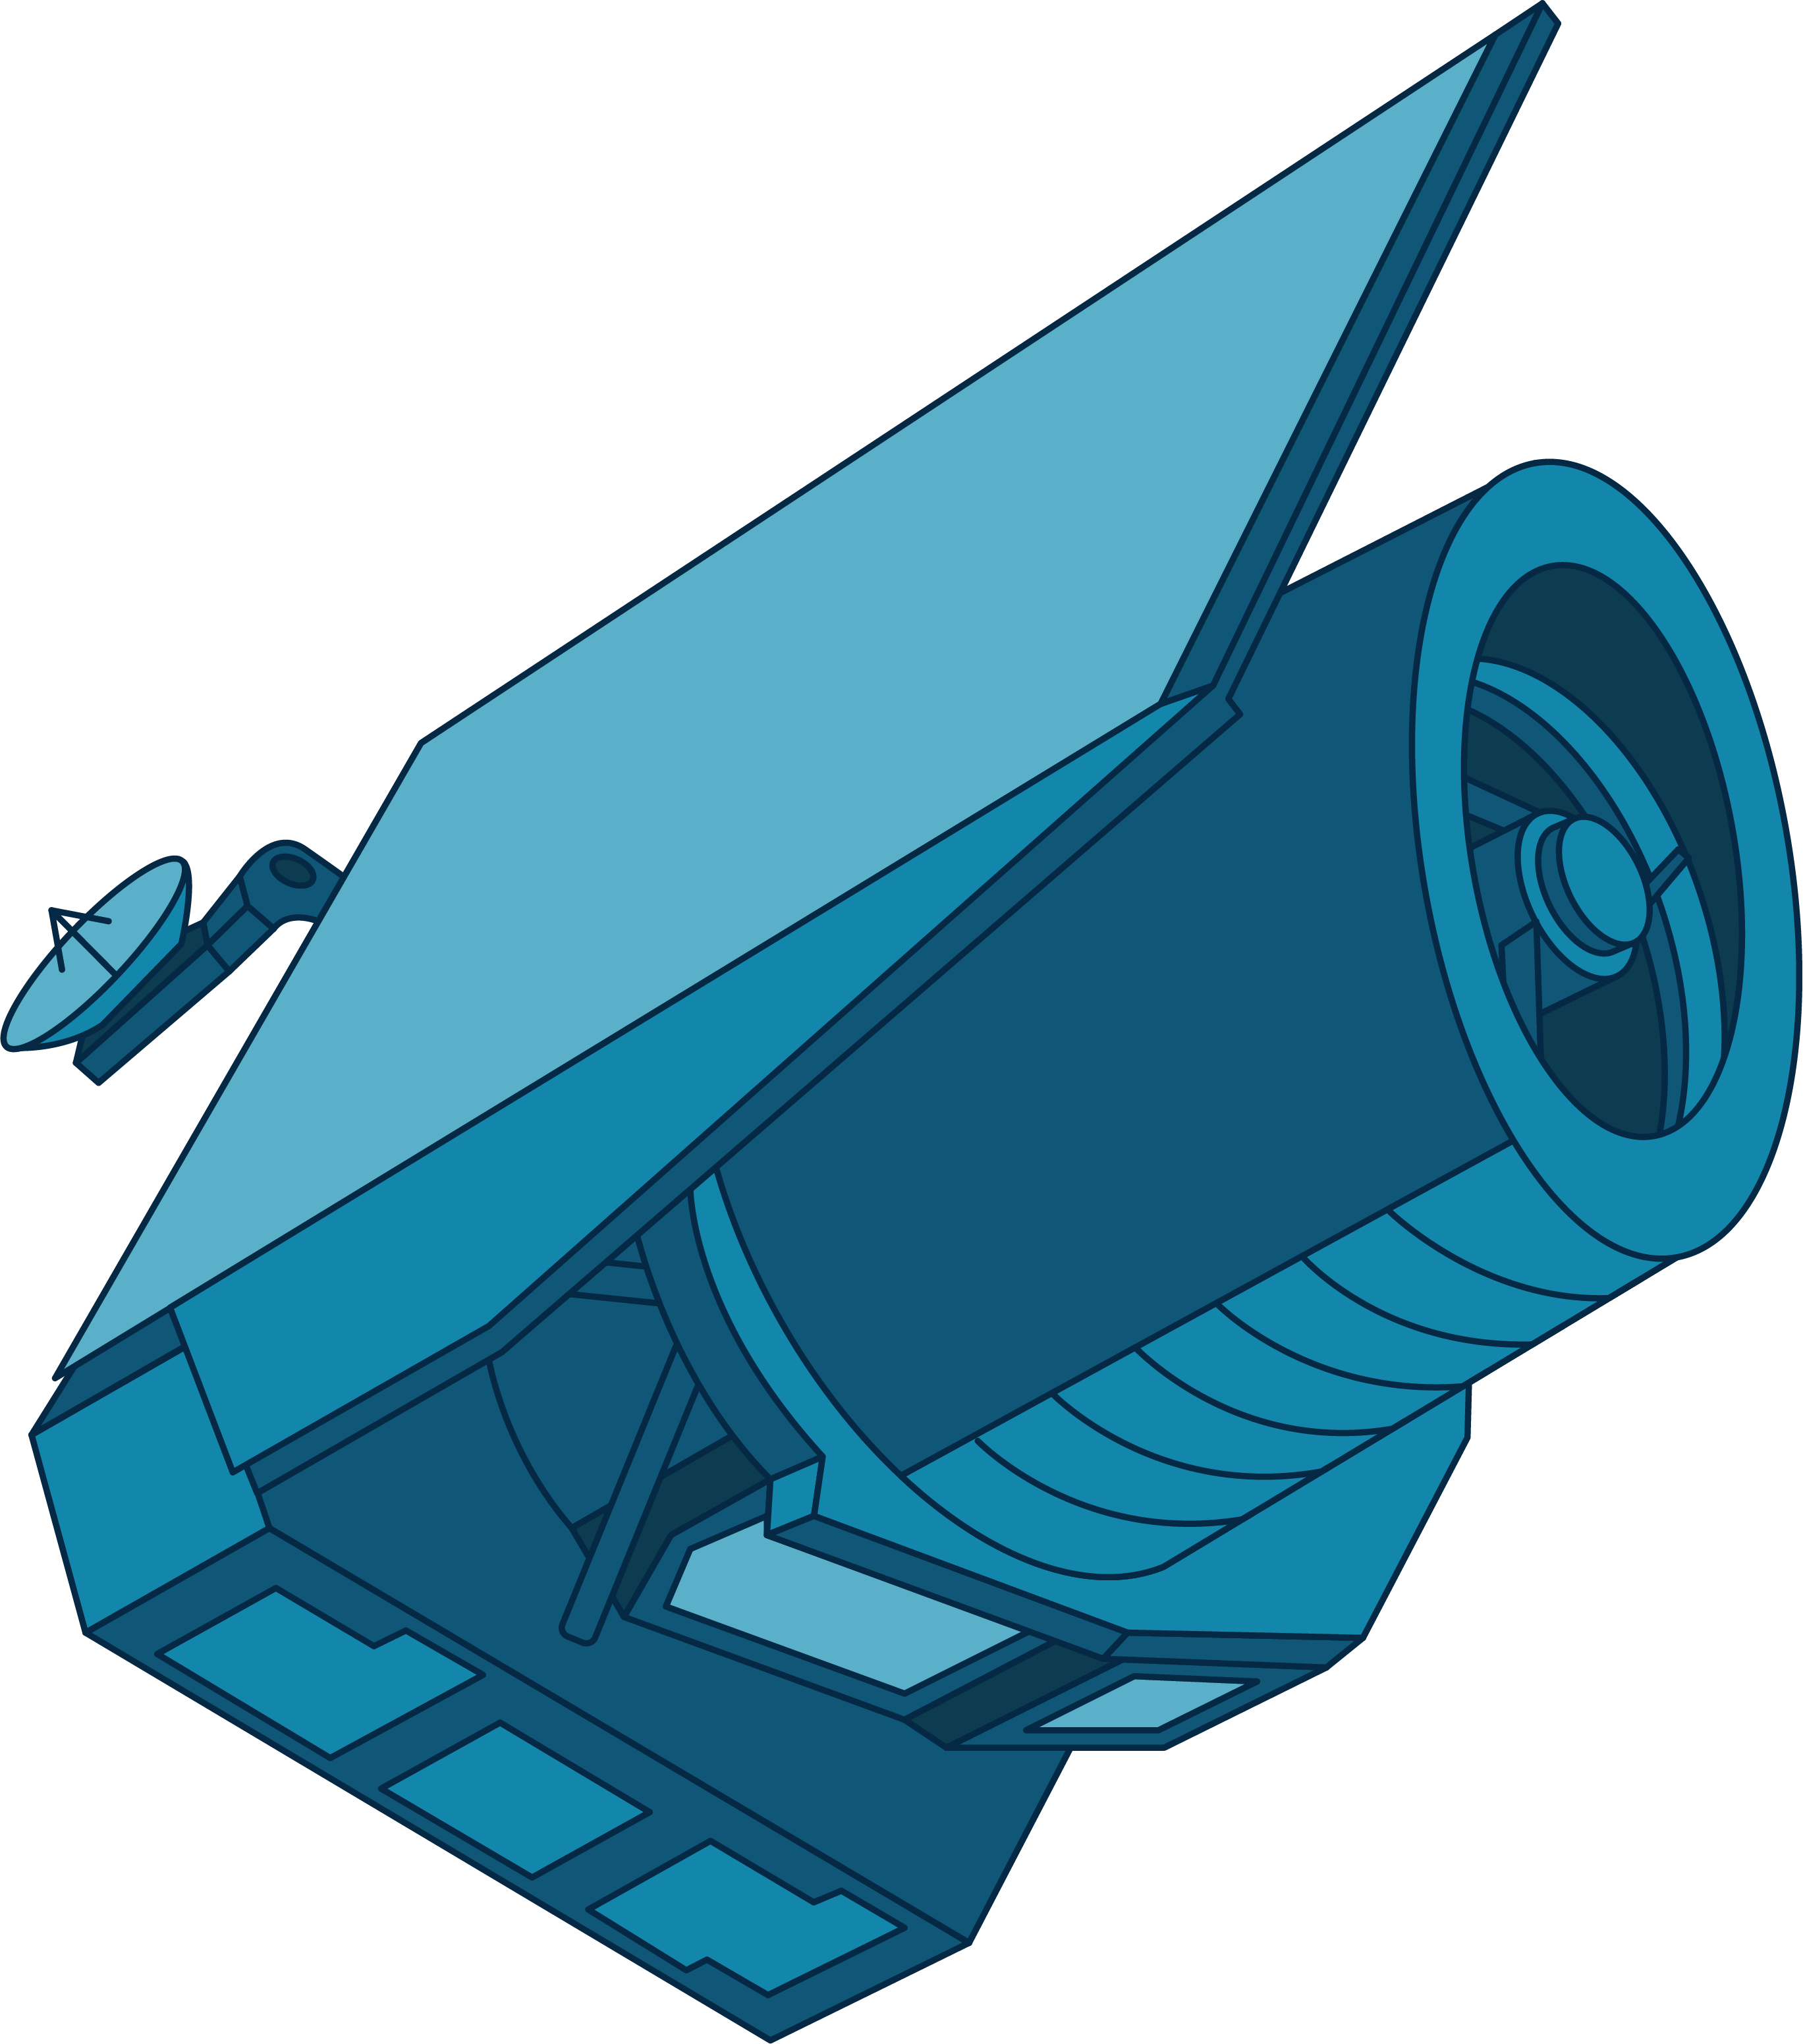 An illustration in multiple shades of blue depicting Euclid. The spacecraft has a cylindrical body with an open top and a flat, square base as well as a flat panel along its back.